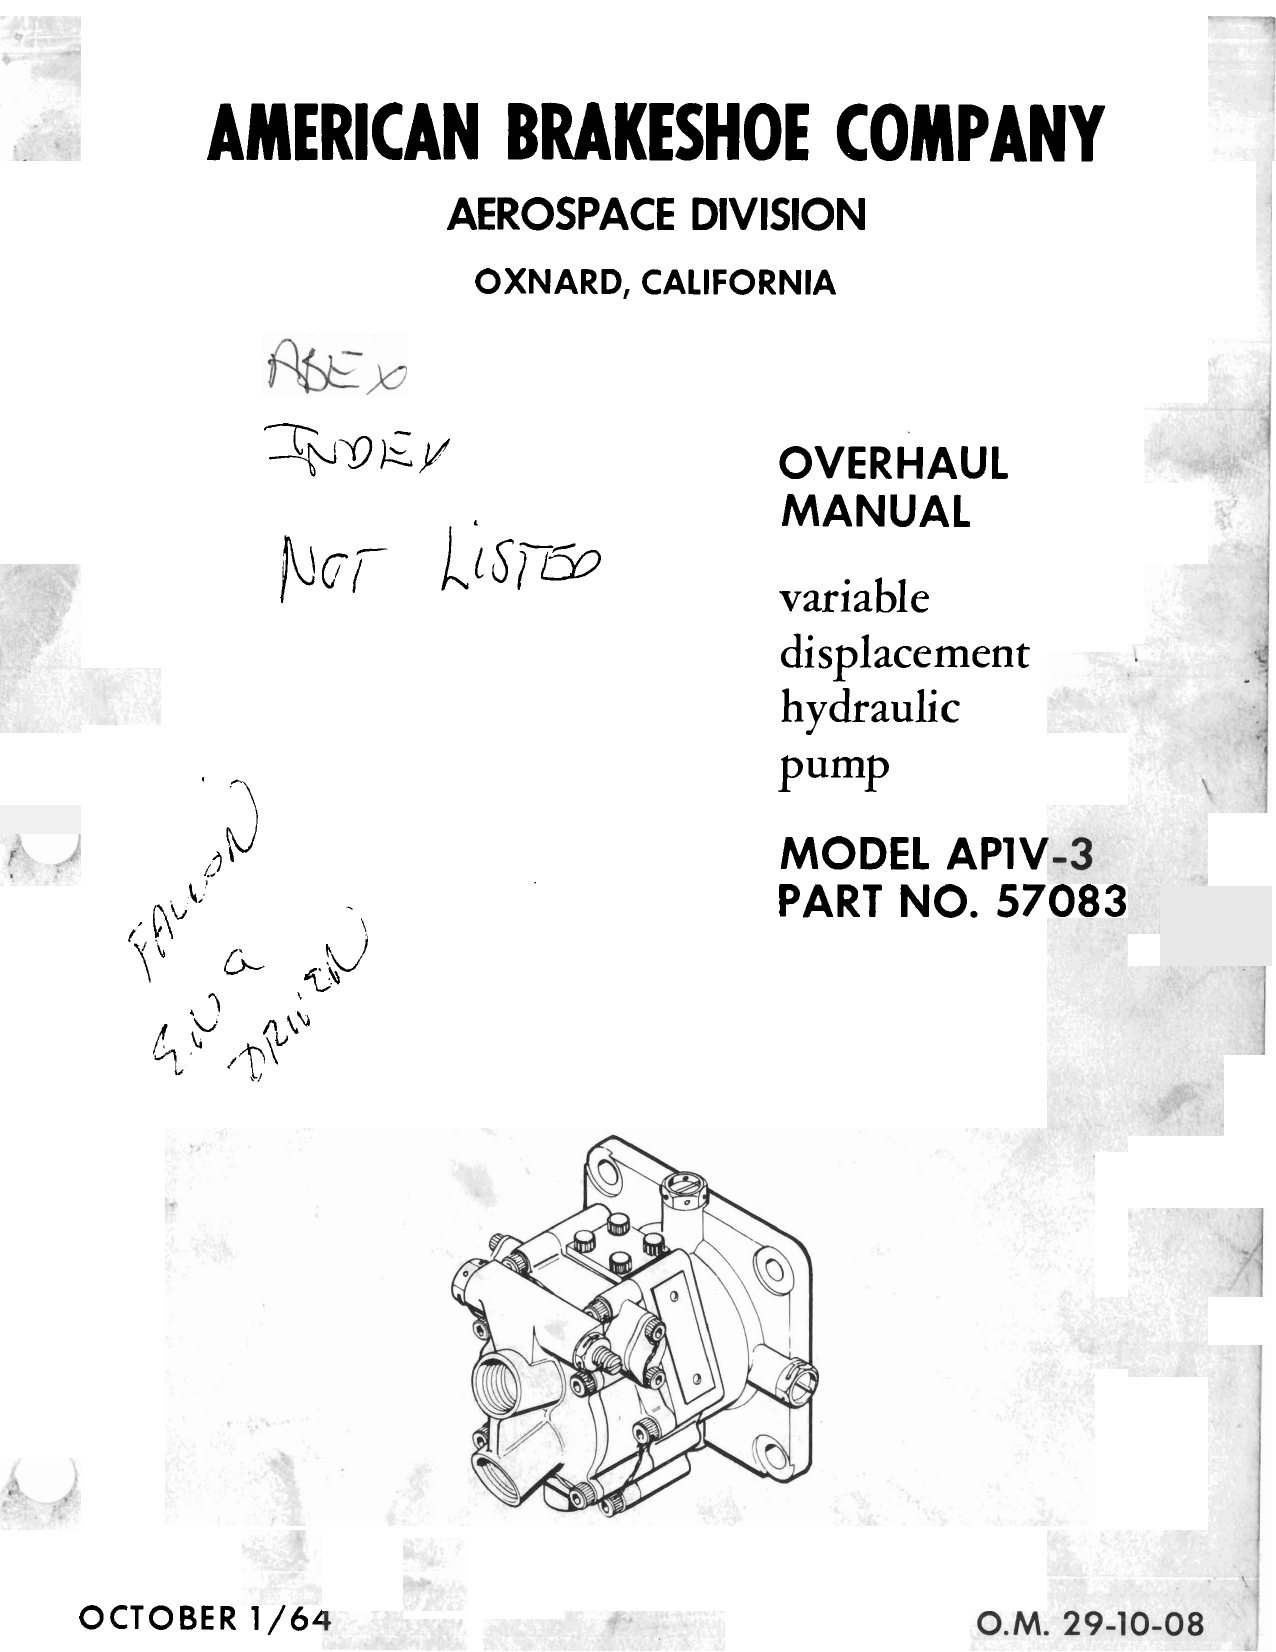 Sample page 1 from AirCorps Library document: Overhaul Manual for Variable Displacement Hydraulic Pump - Model AP1V-3 - Part 57083 